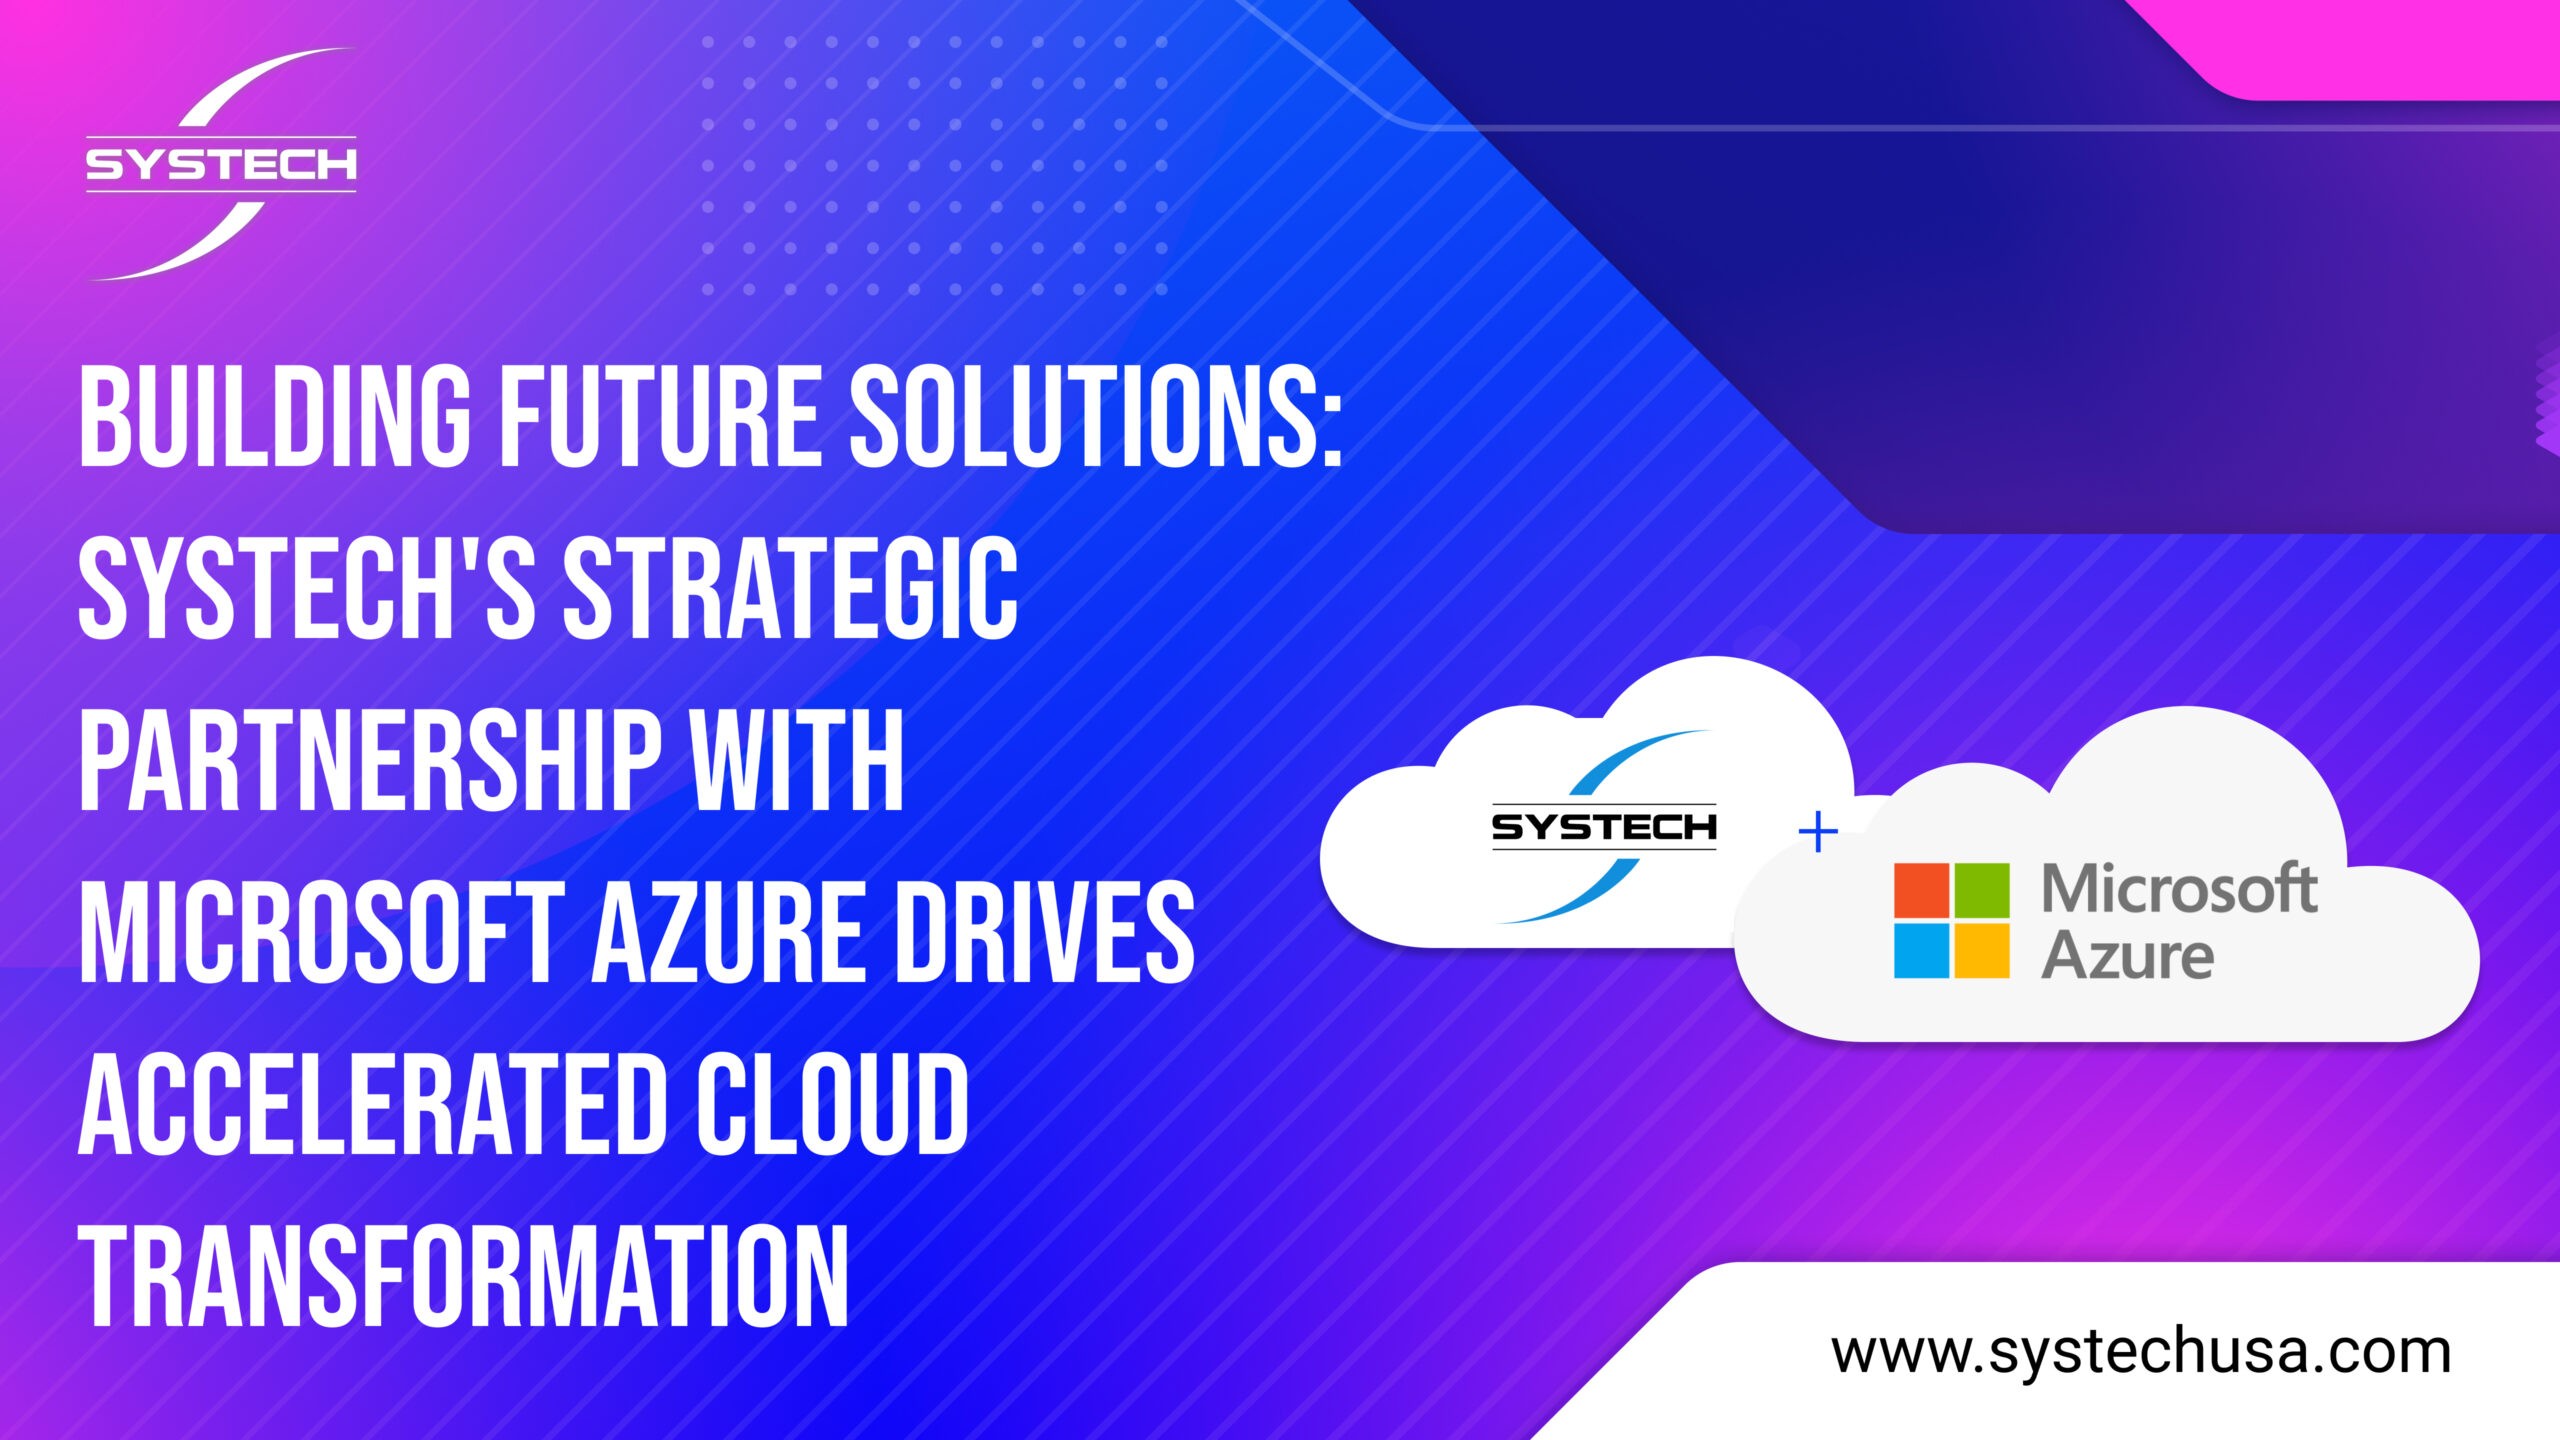 Systech's Strategic Partnership with Microsoft Azure